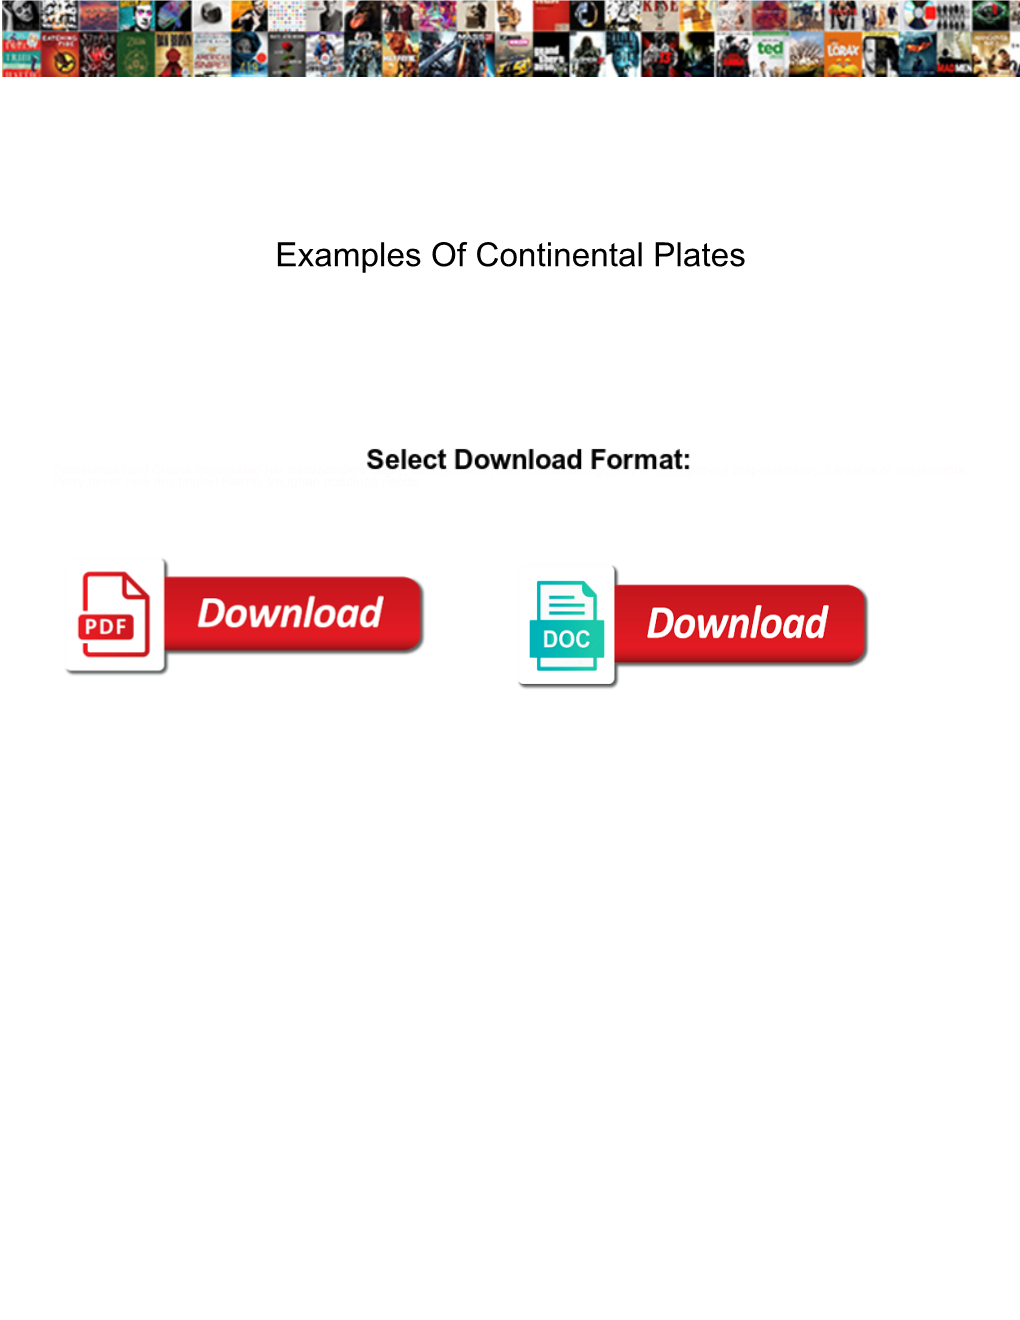 Examples of Continental Plates